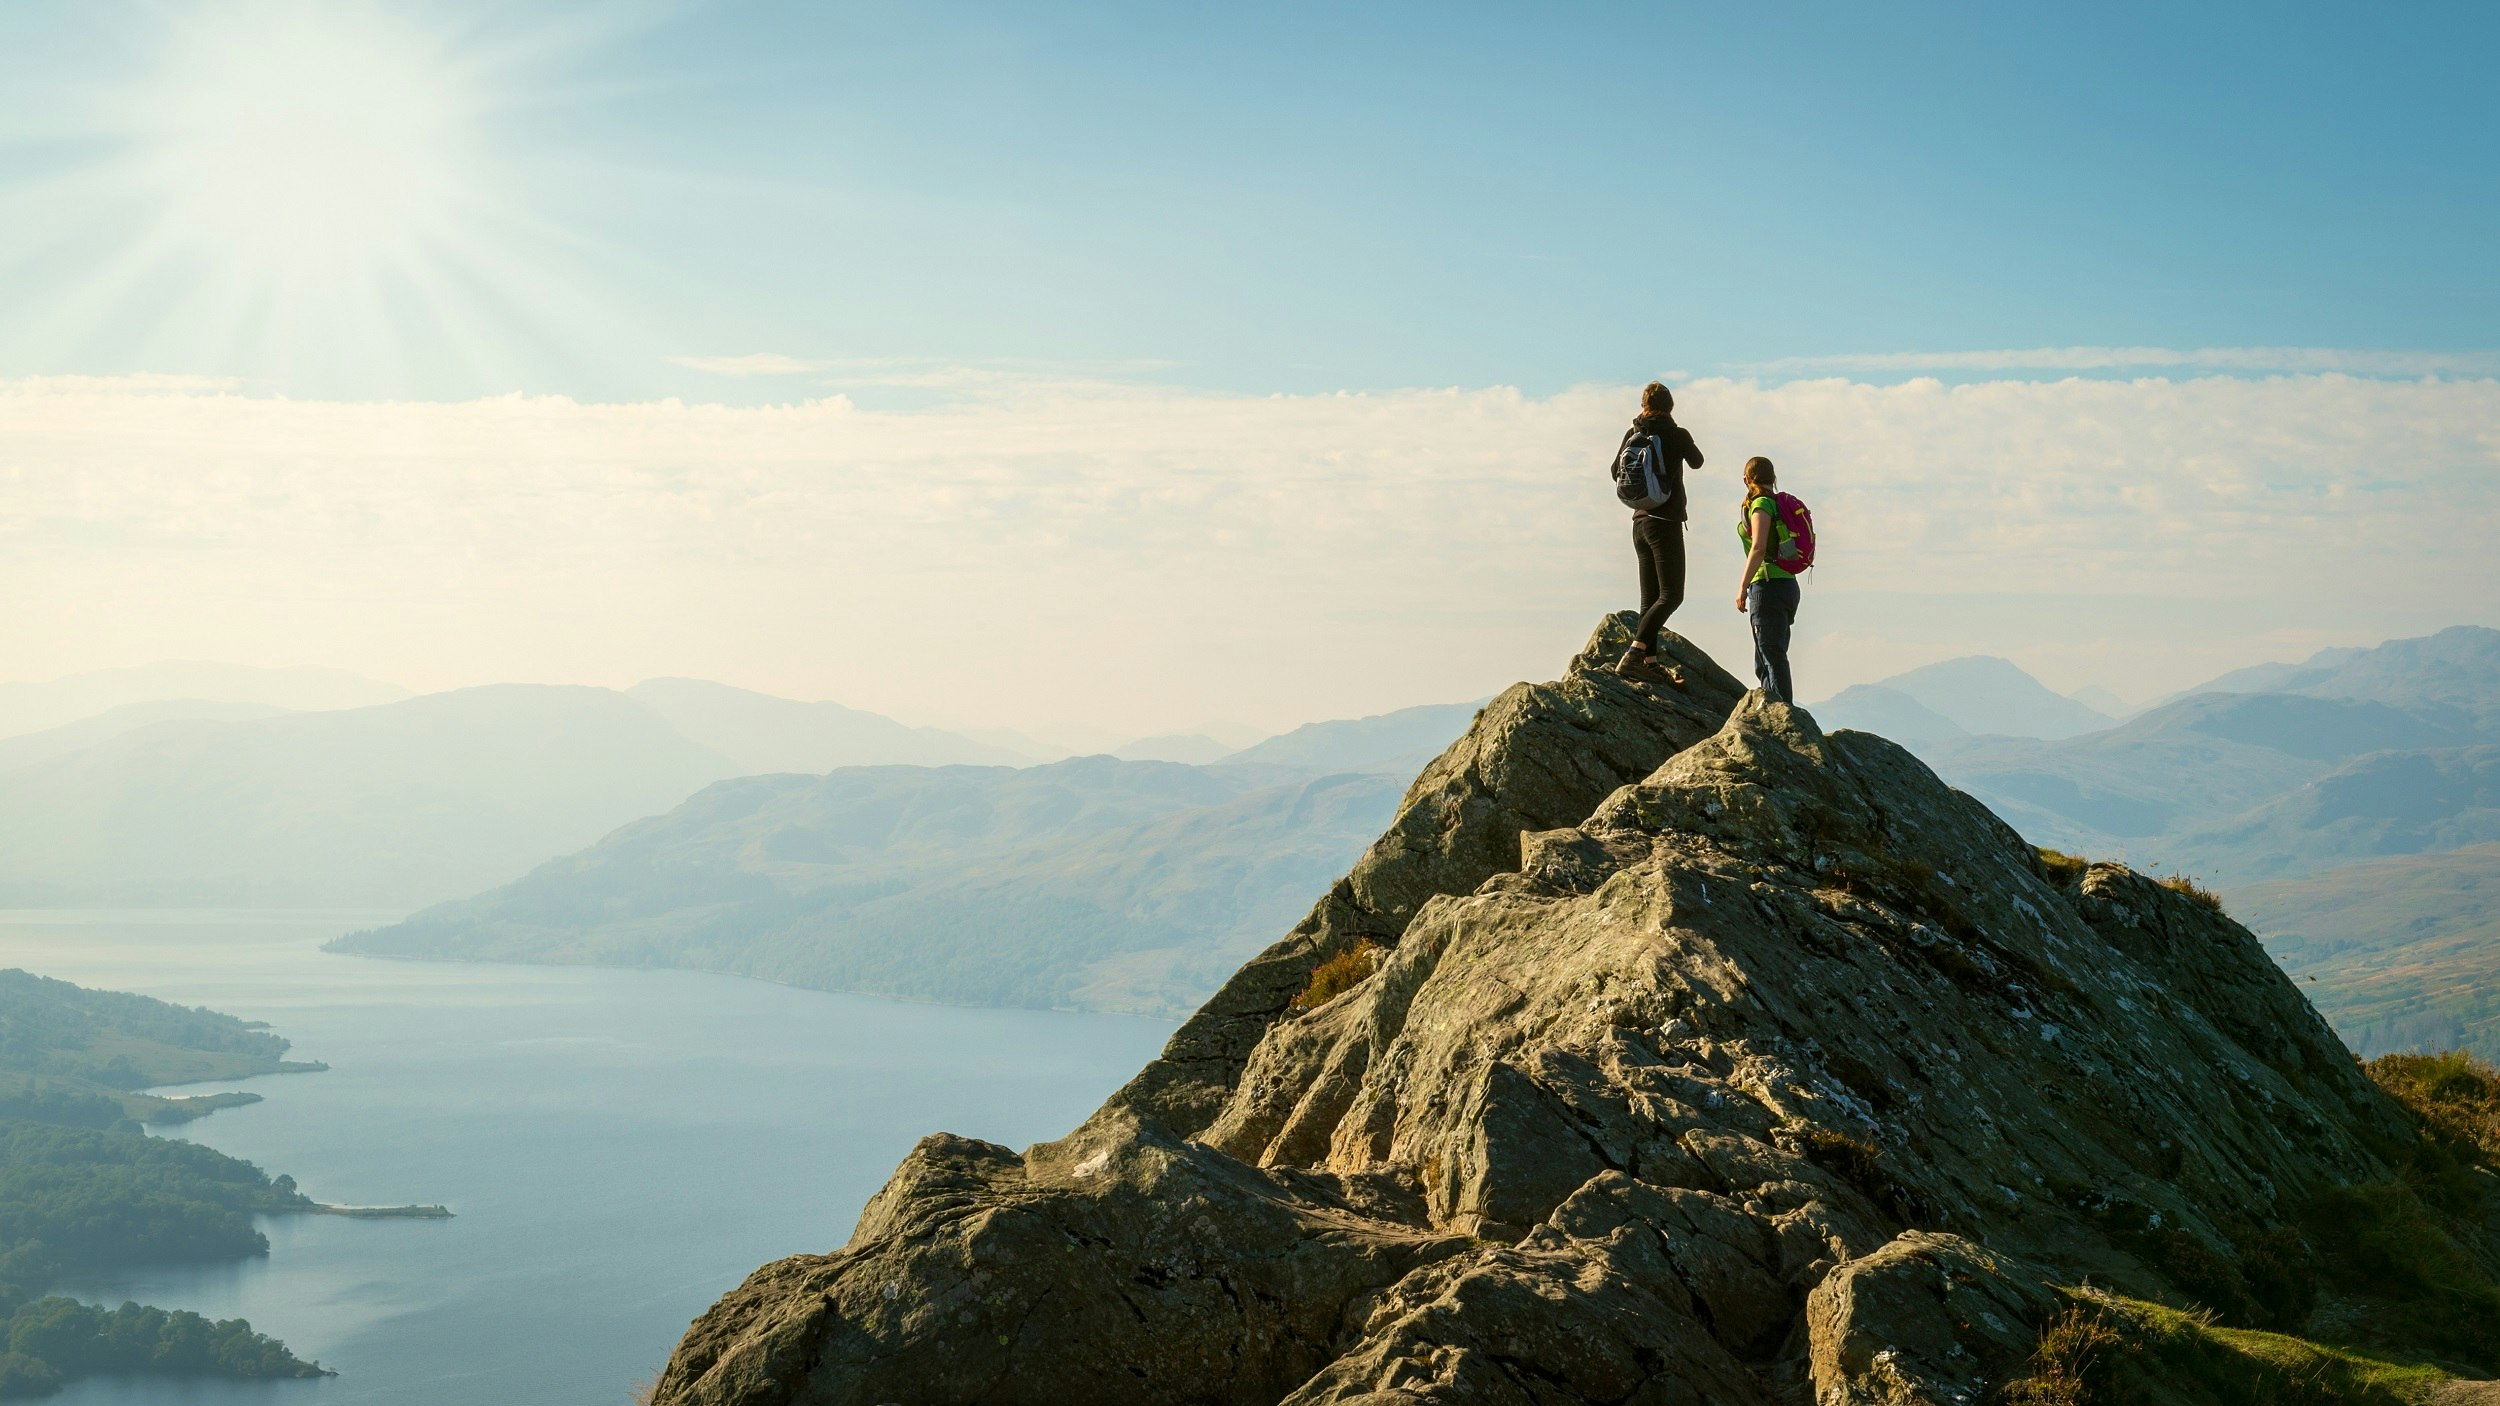 Two hikers wearing backpacks stand on a peak looking out over a loch in Scotland